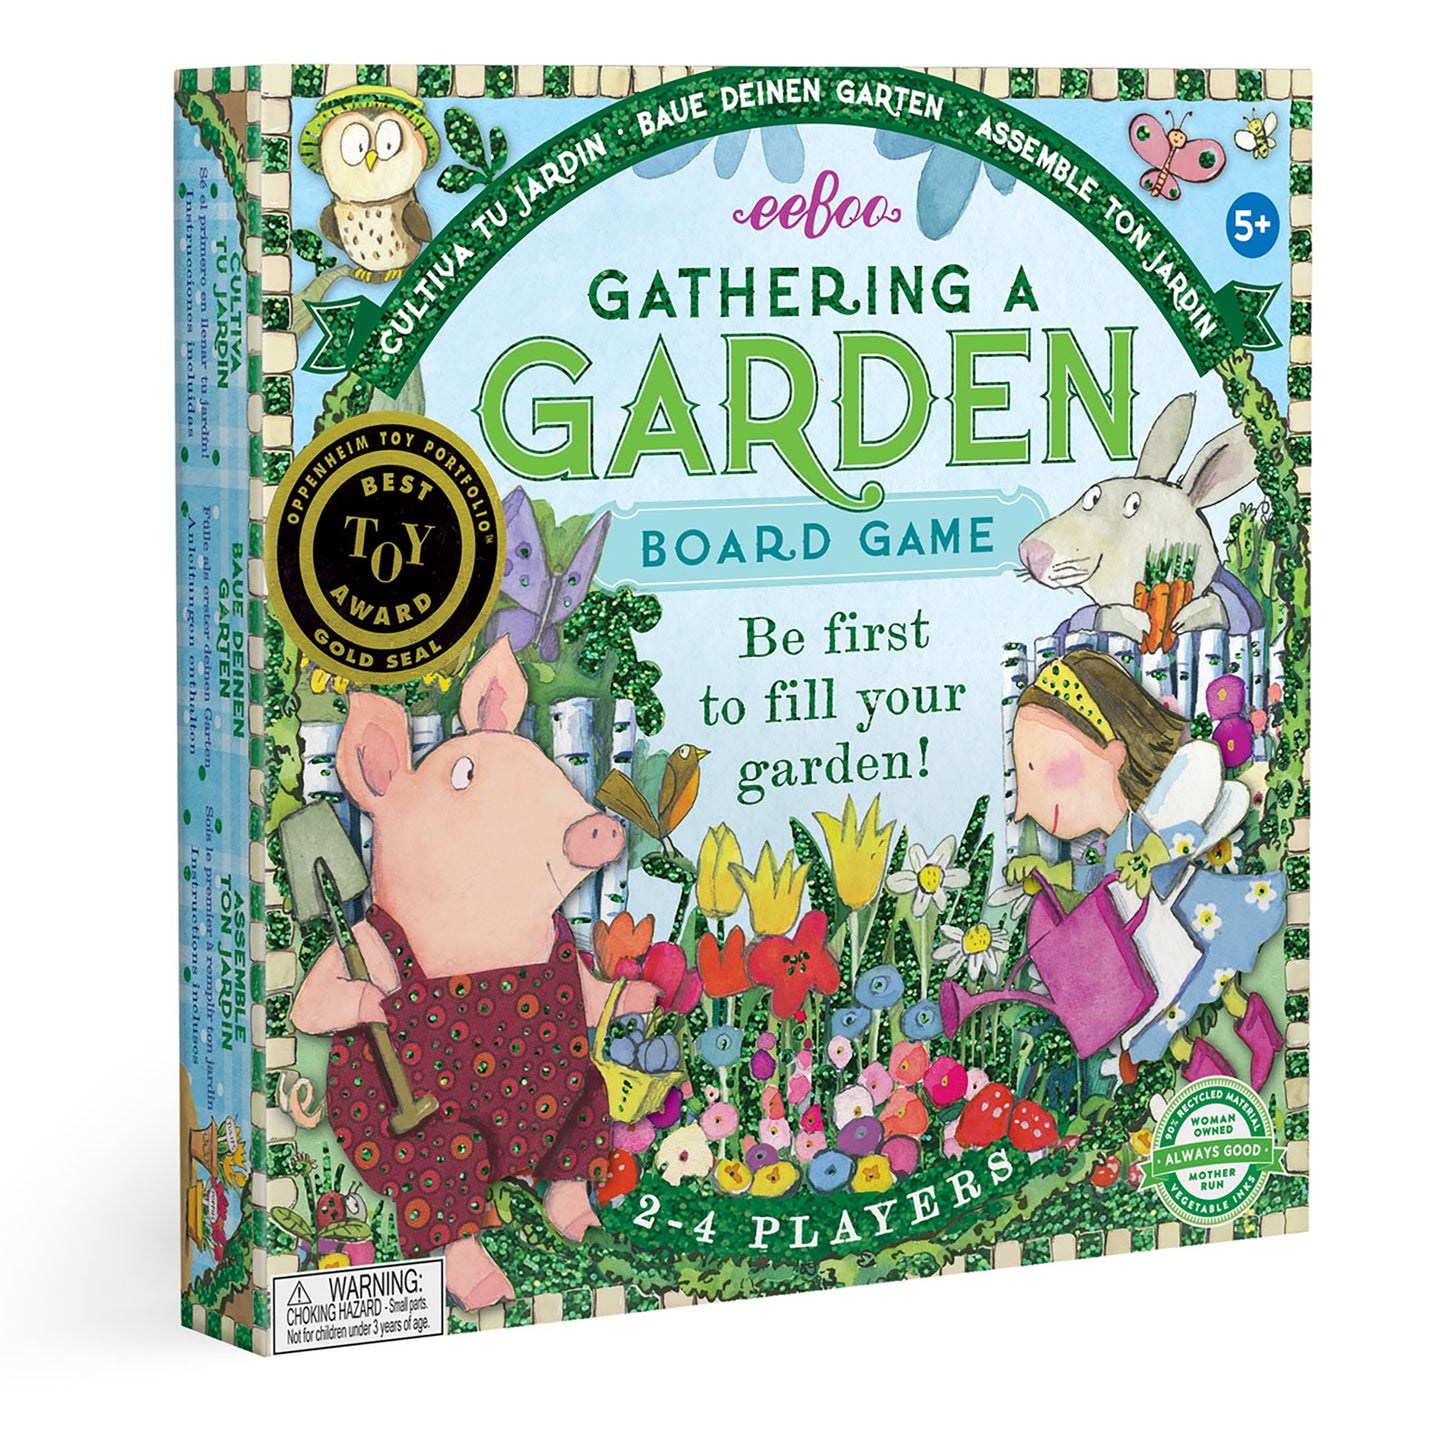 Gathering a Garden | Award Winning Kids Board Game by eeBoo for kids Ages 5+